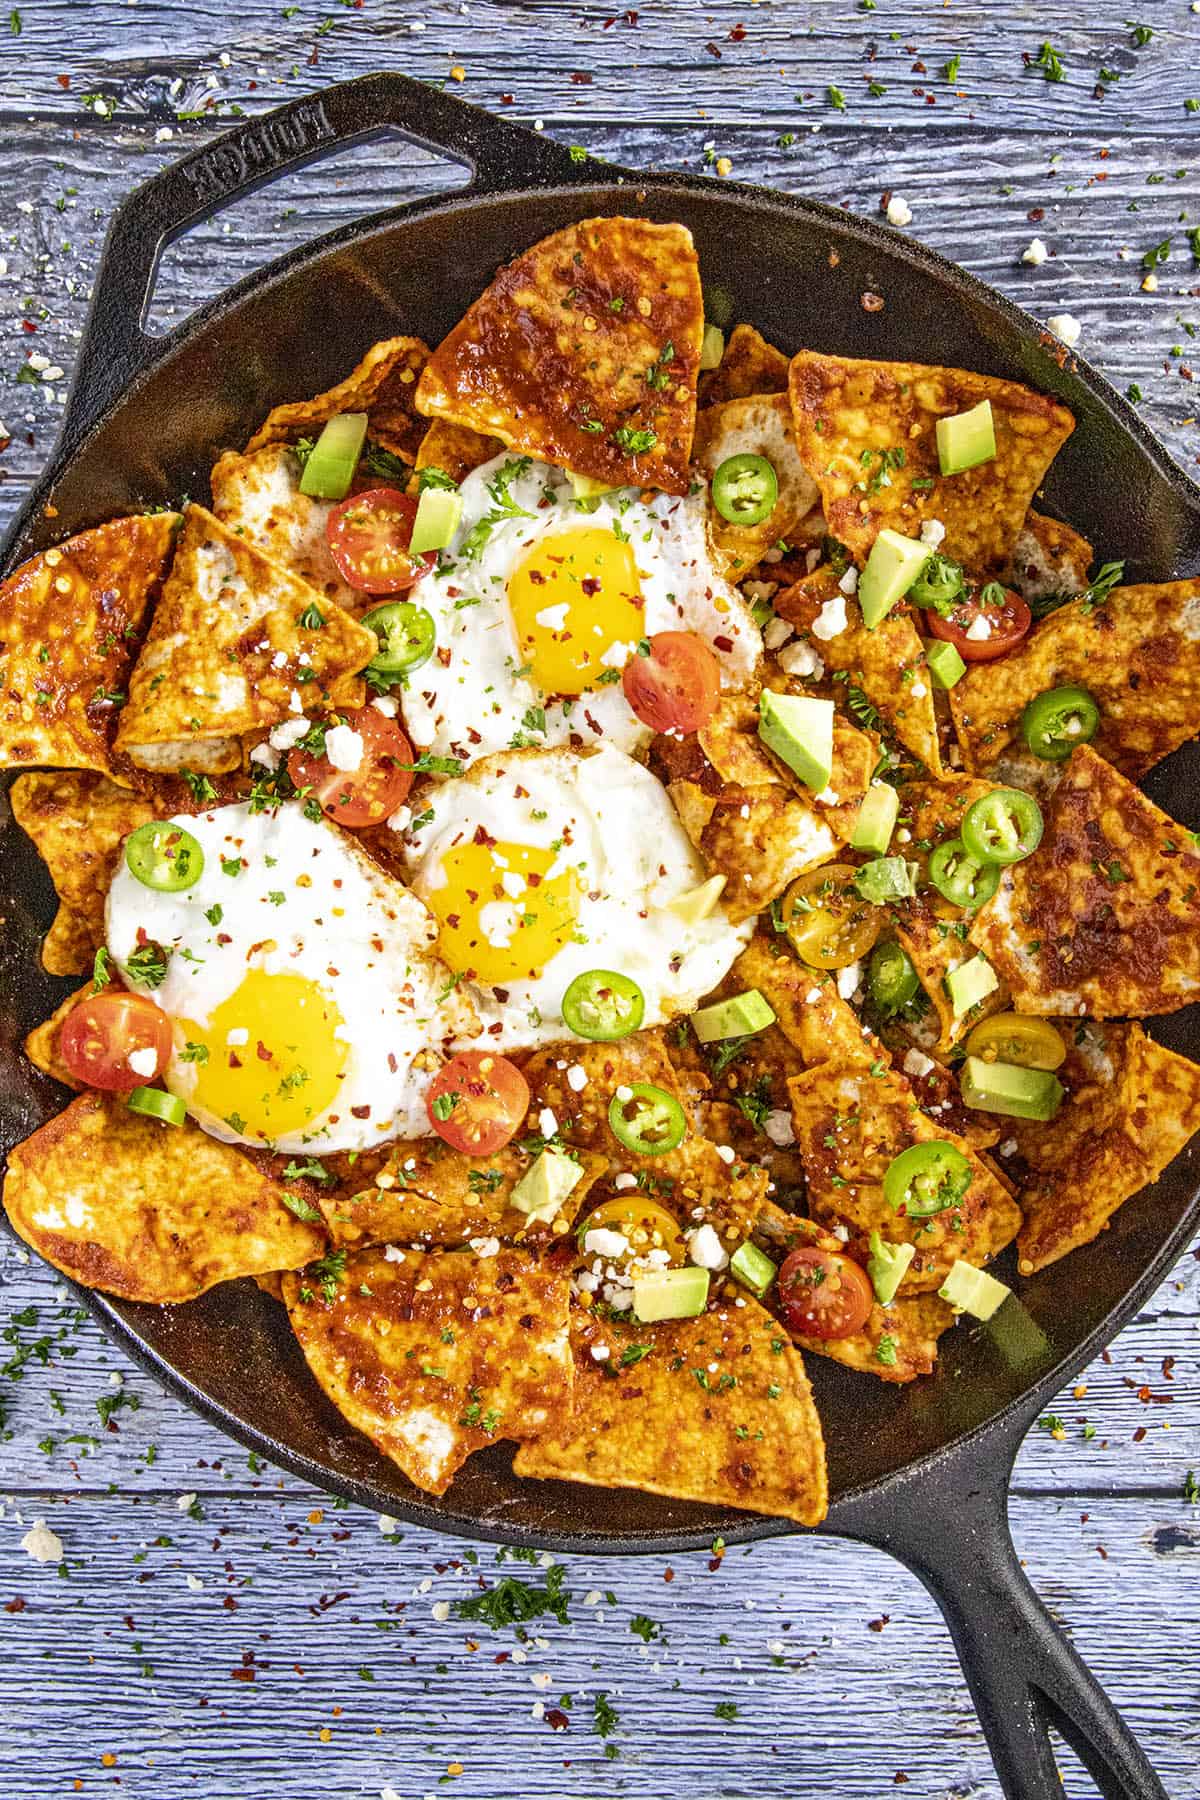 Chilaquiles Rojos with Ancho Chili Sauce - Recipe - Chili Pepper Madness